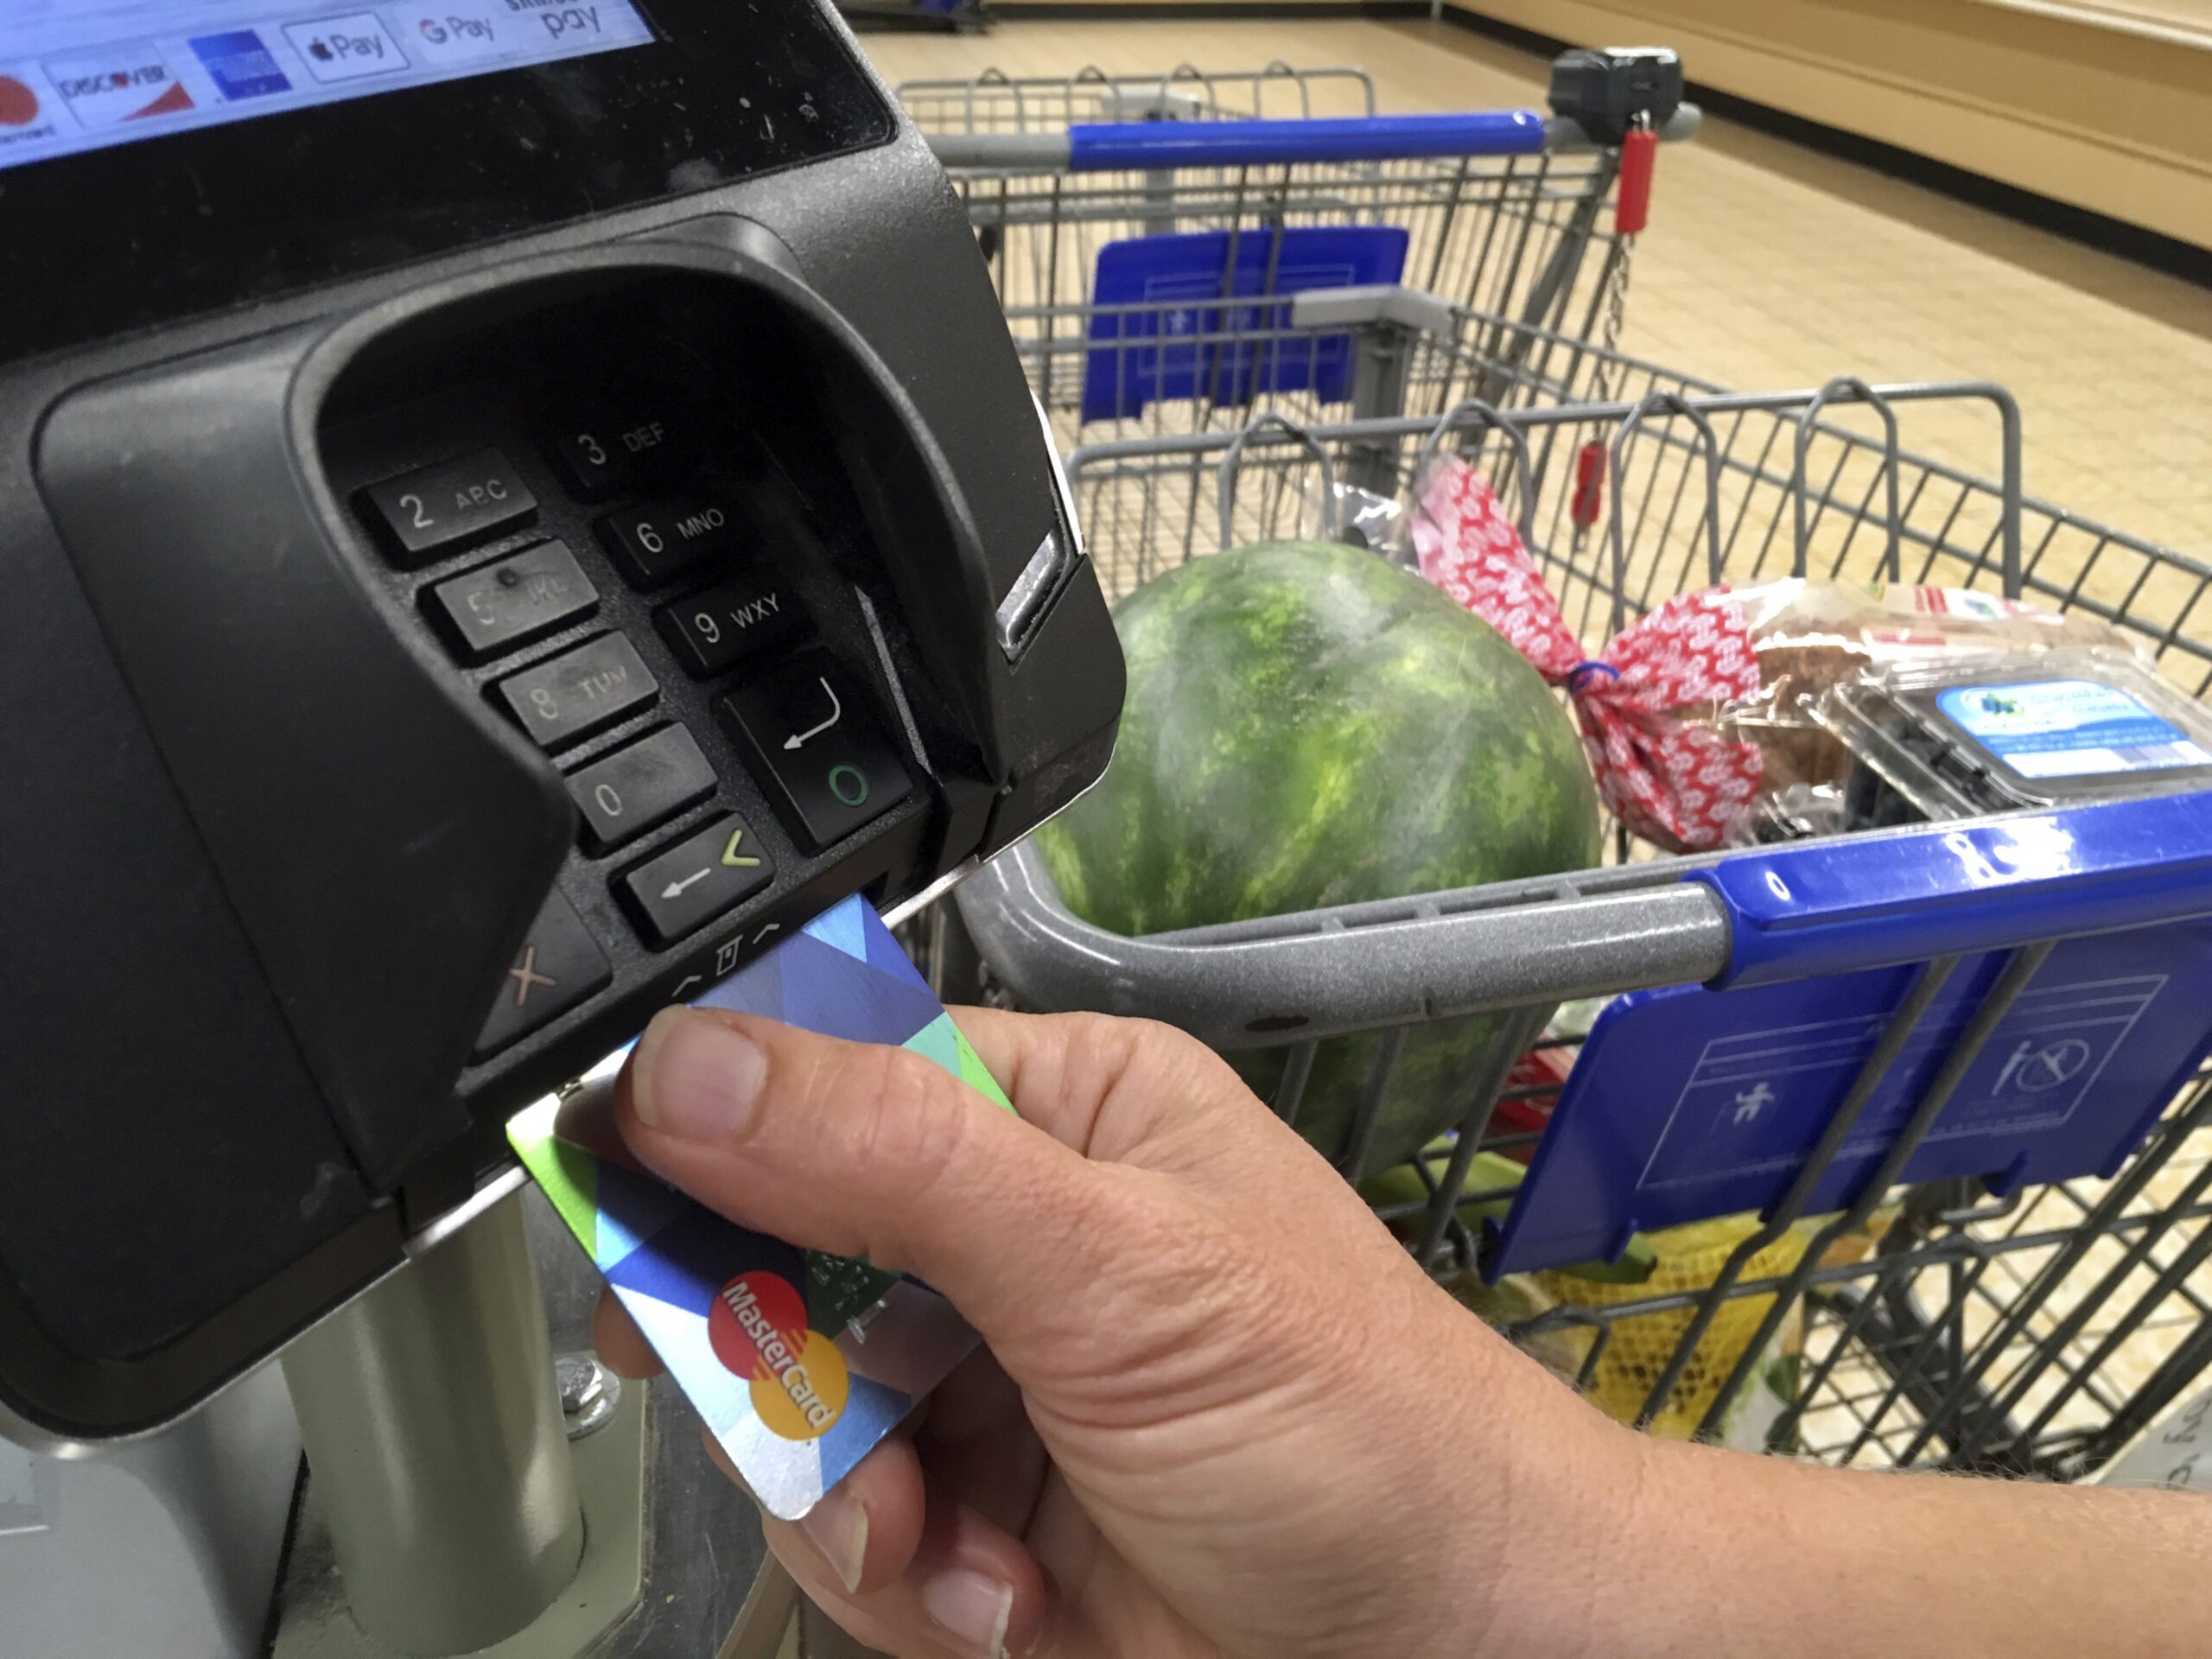 A customer buys groceries with a credit card